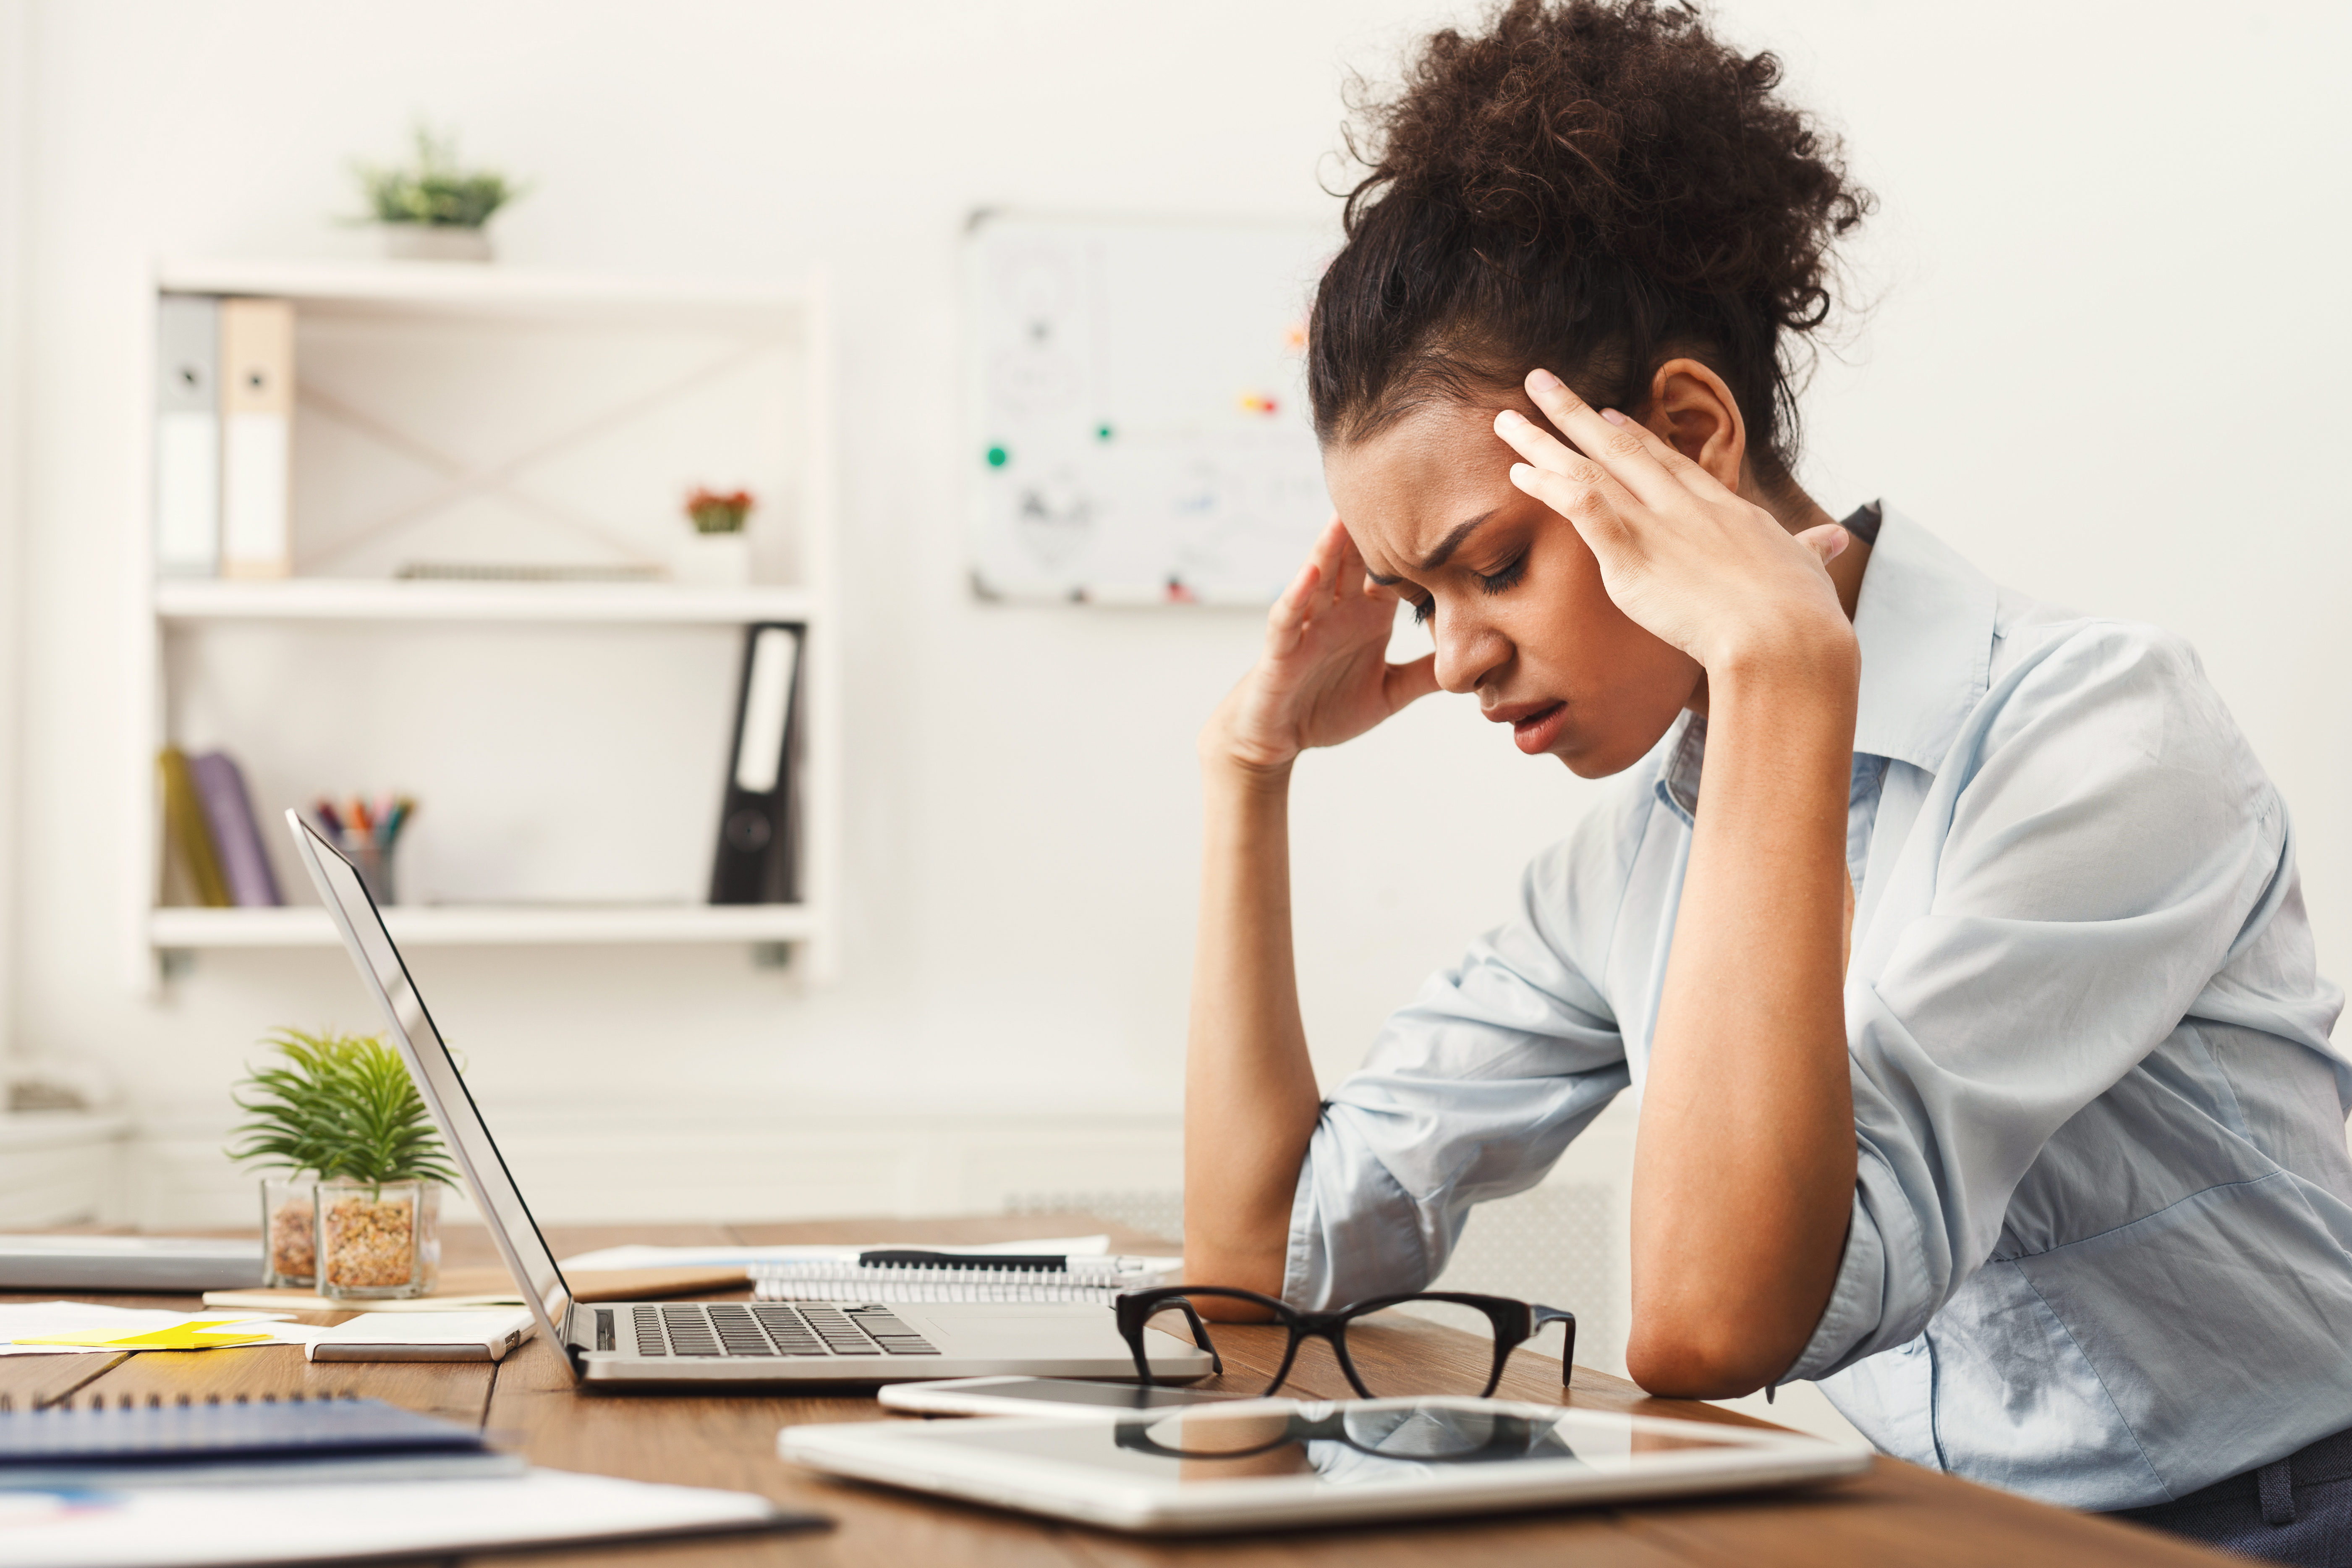 The Signs Of Burnout And What To Do About Them